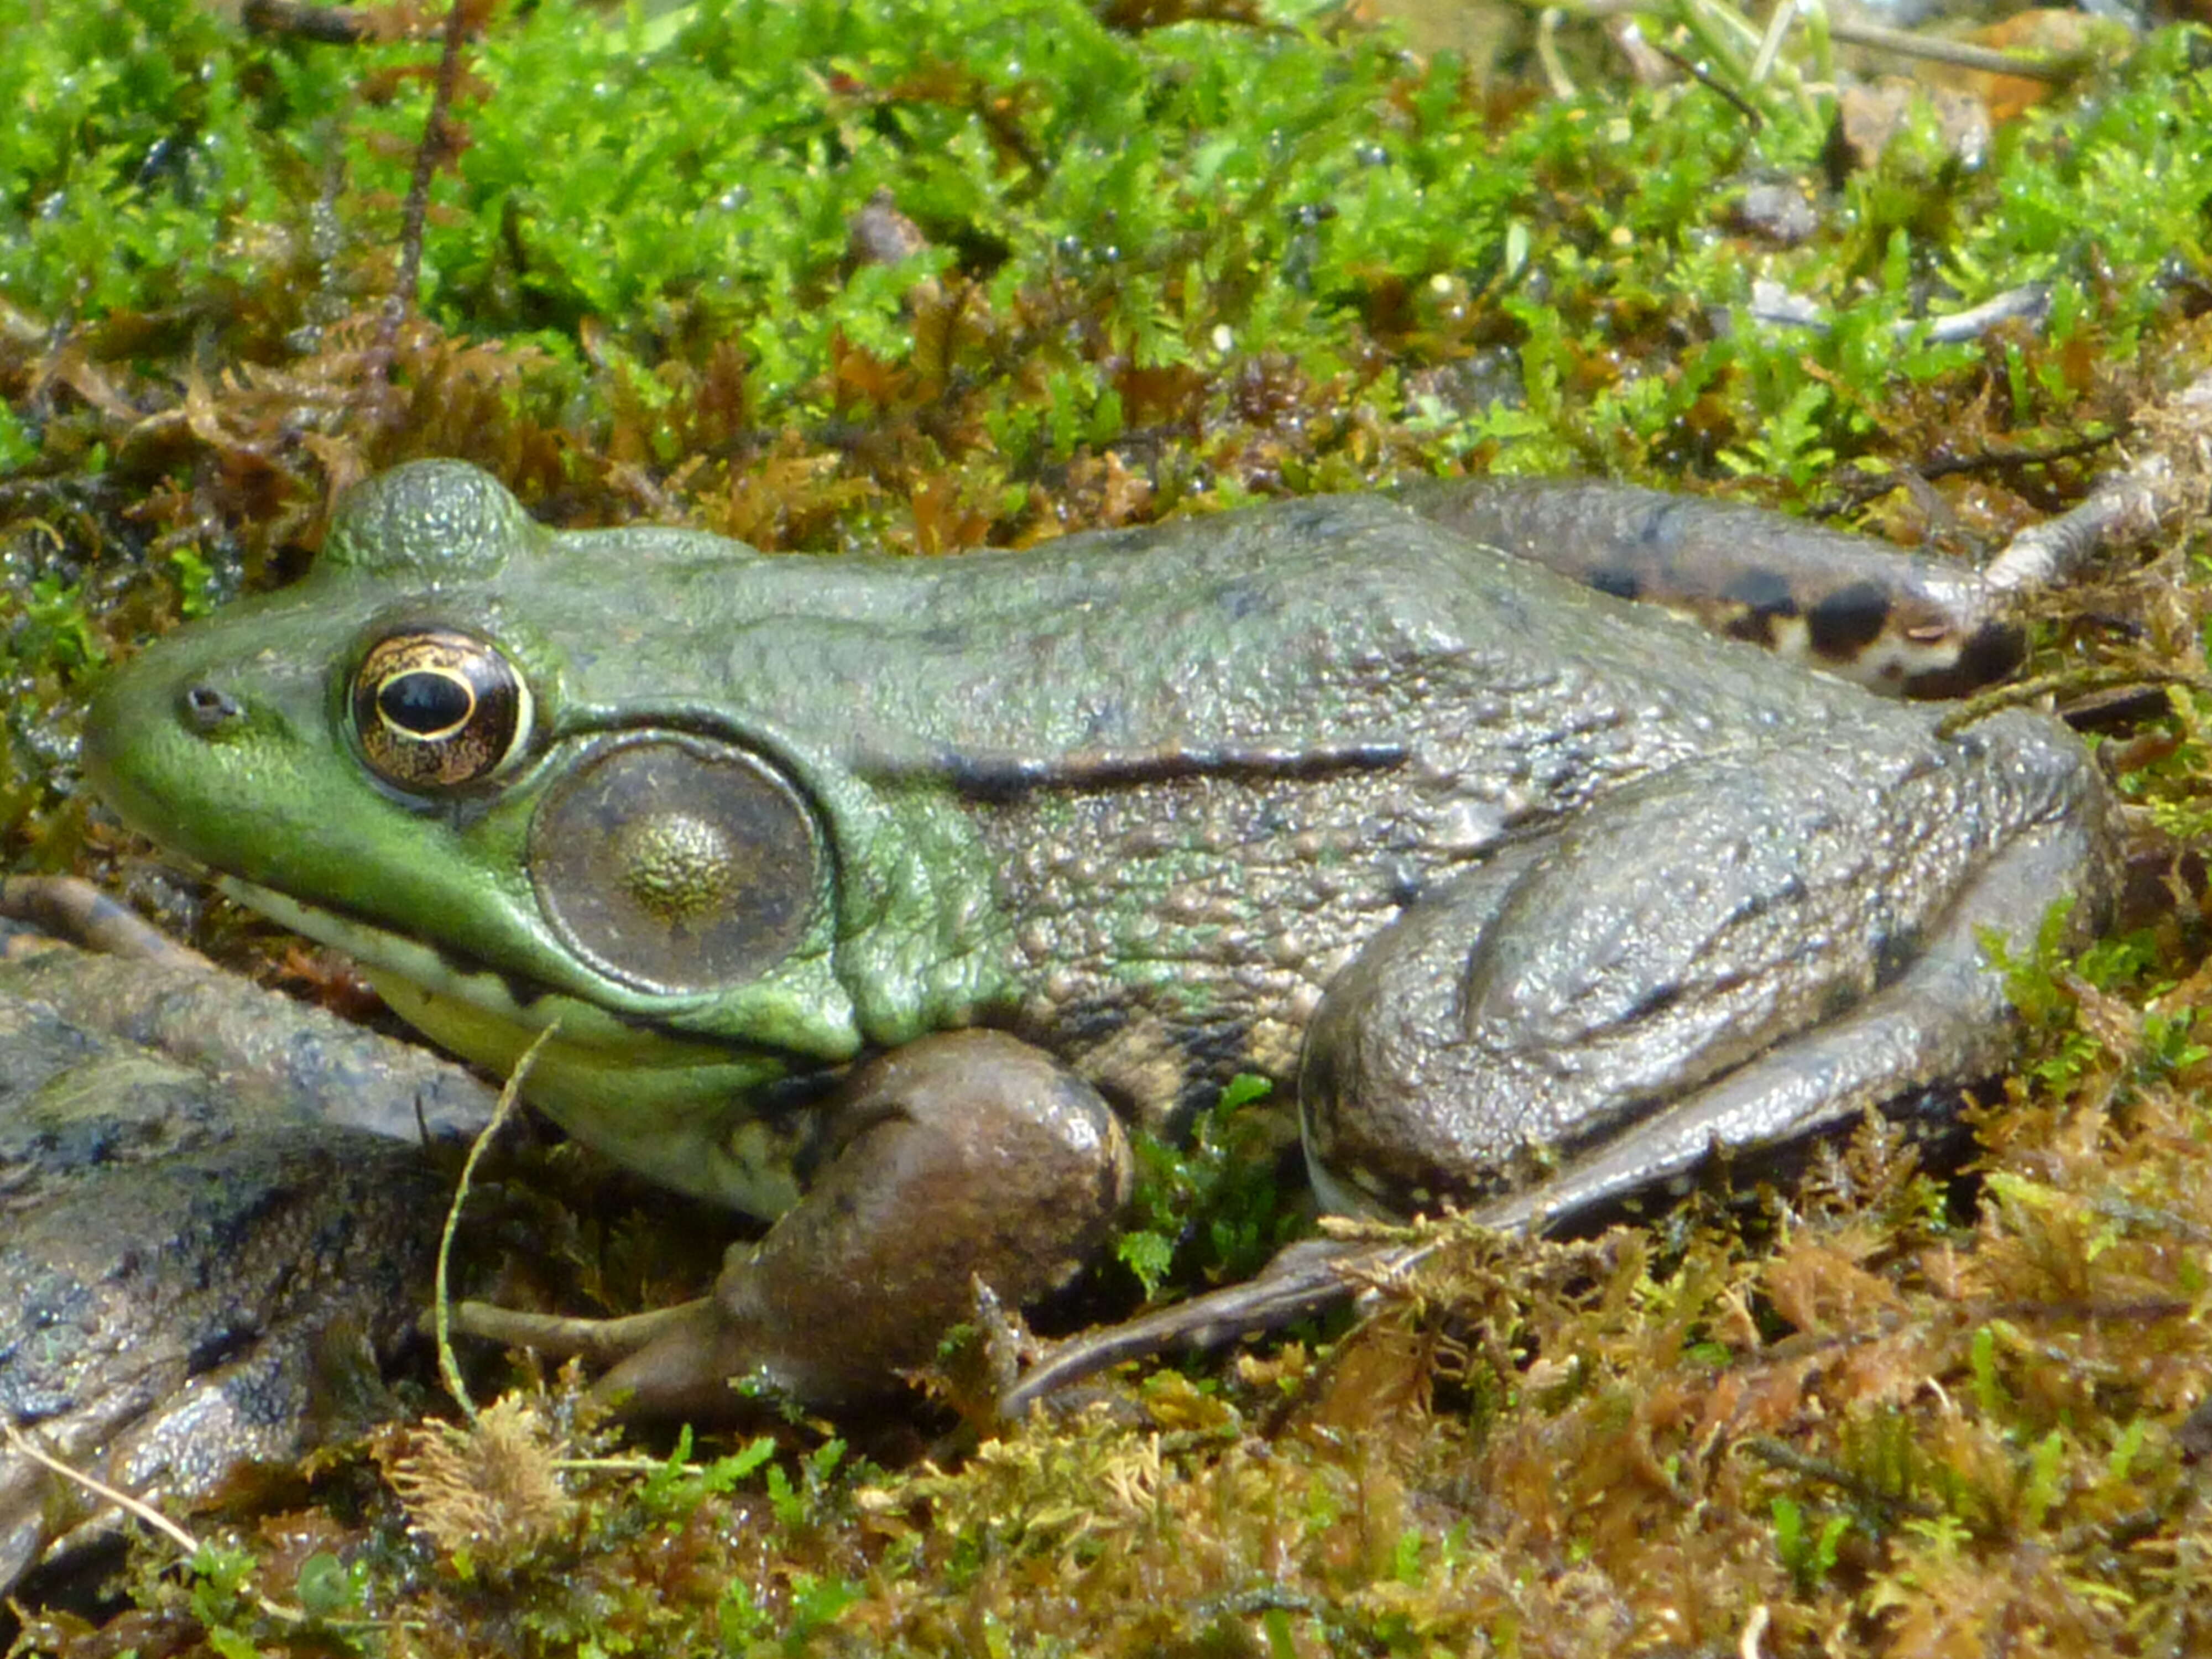 Image of Green Frog